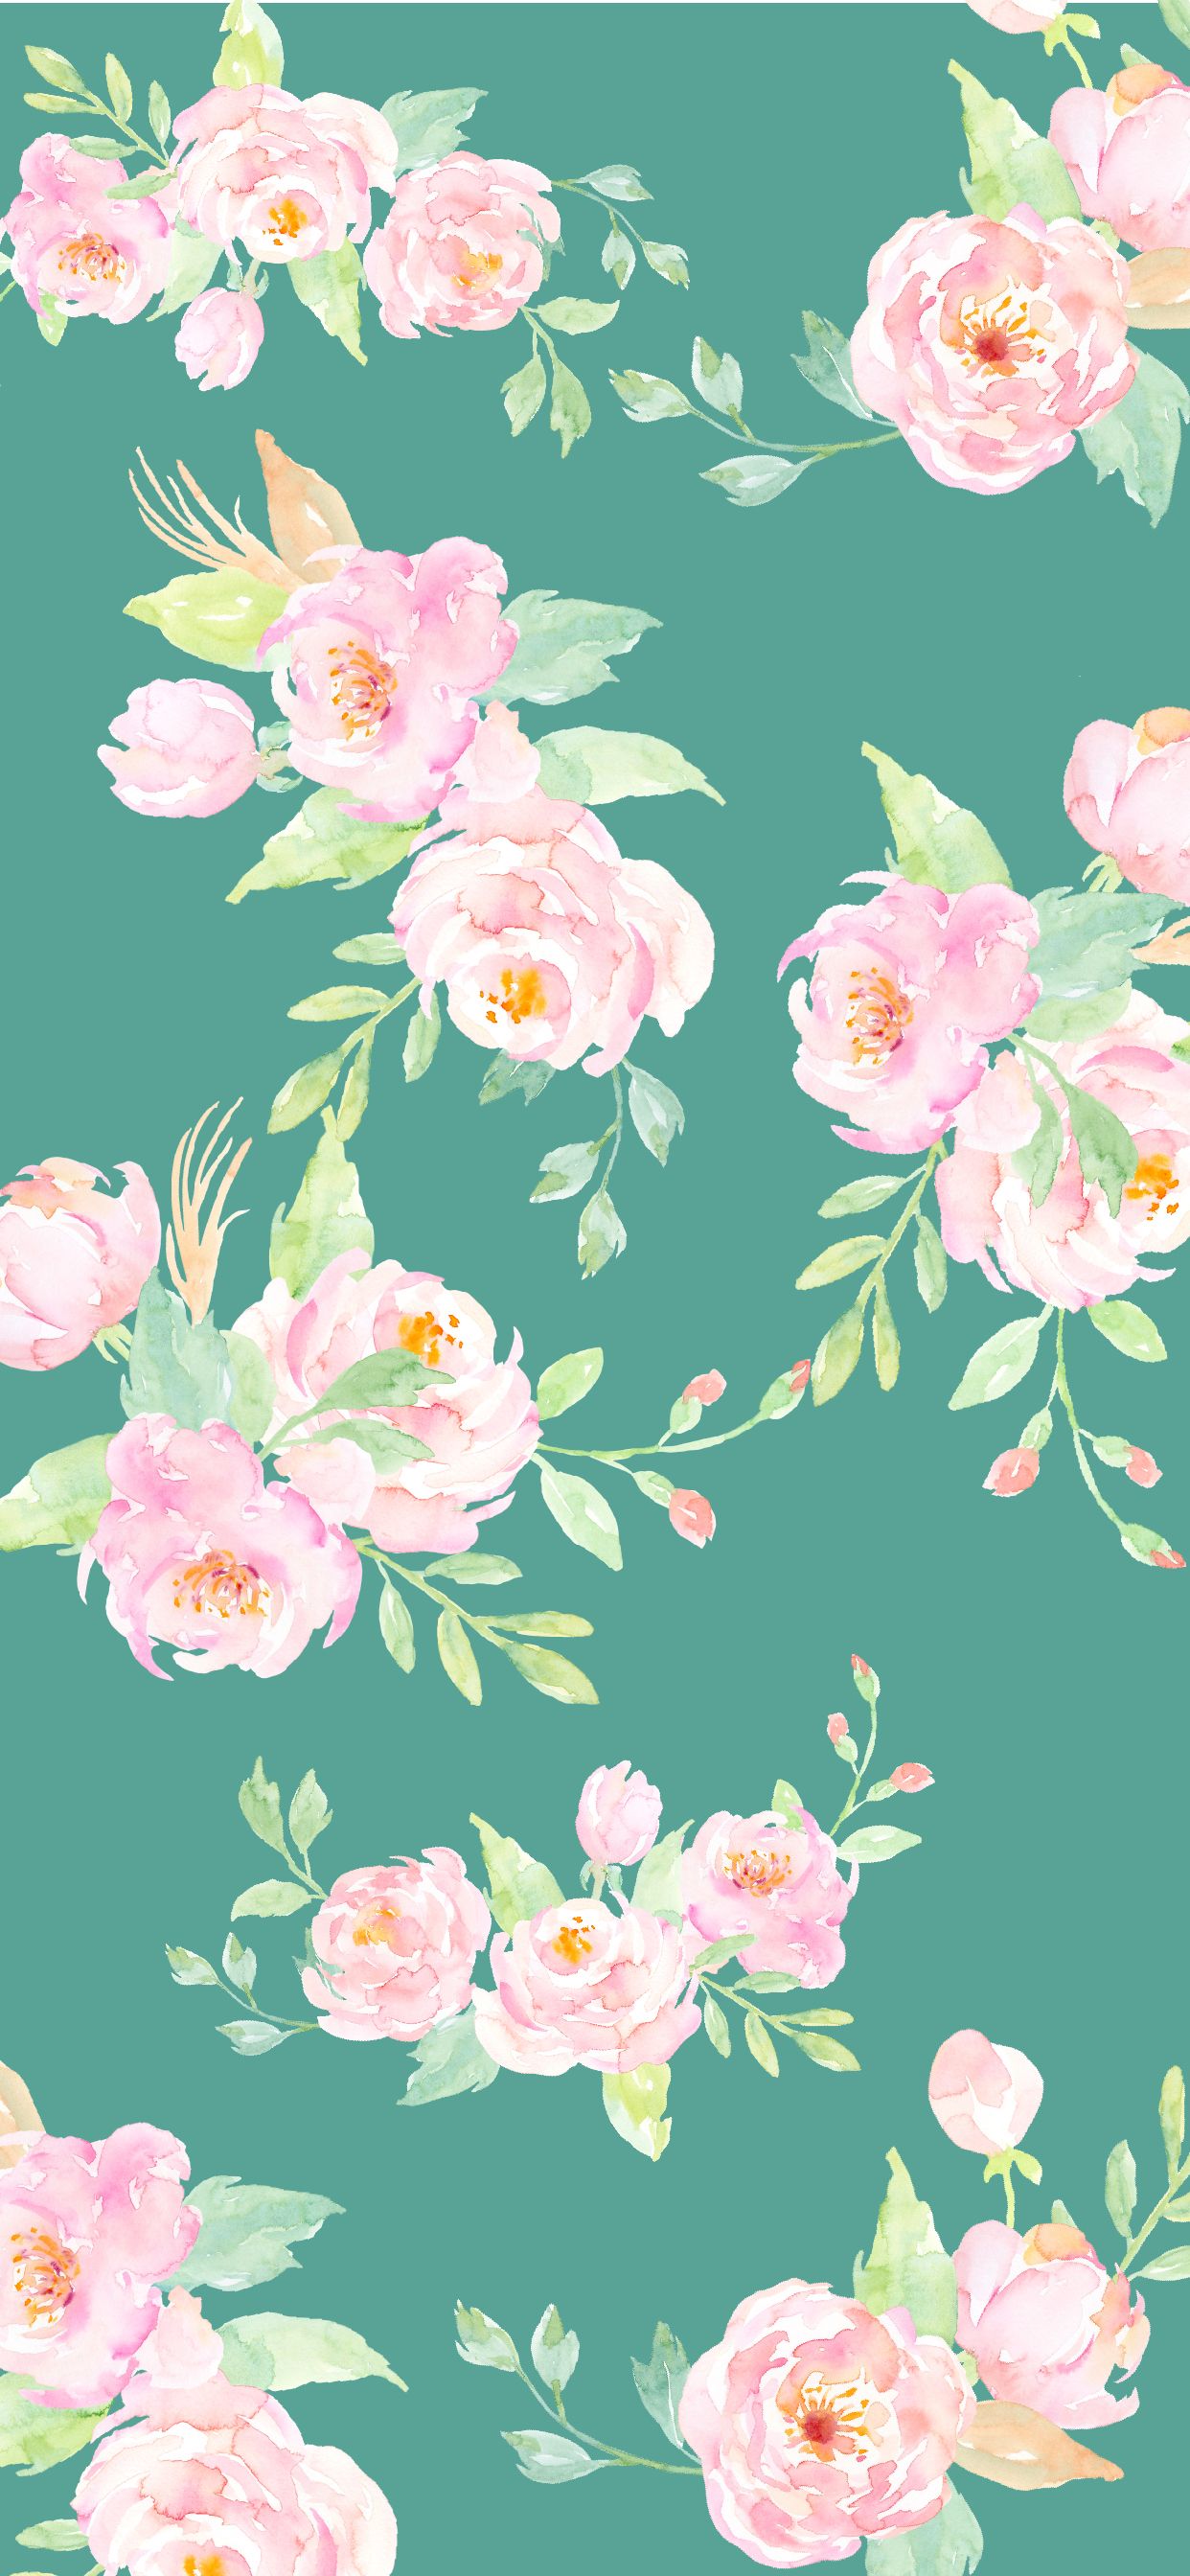 Dainty Flowers Wallpapers - Wallpaper Cave